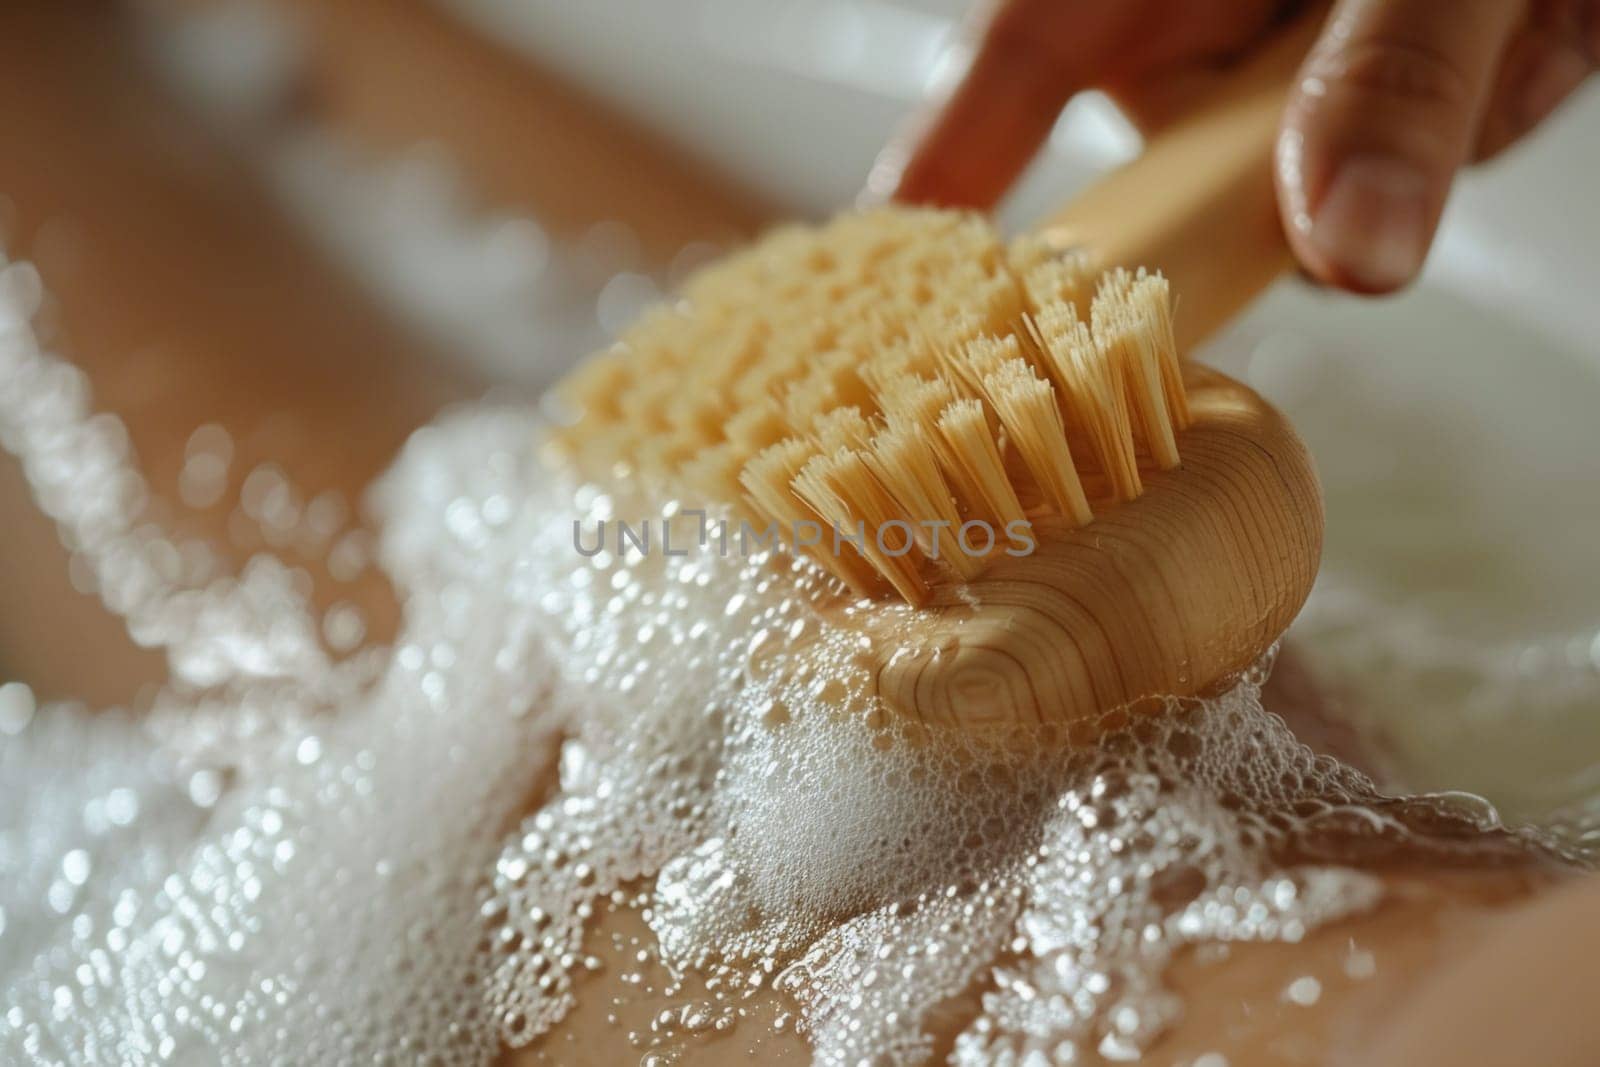 A demonstration of the dry brushing technique on skin, emphasizing the action and health benefits of this wellness practice.